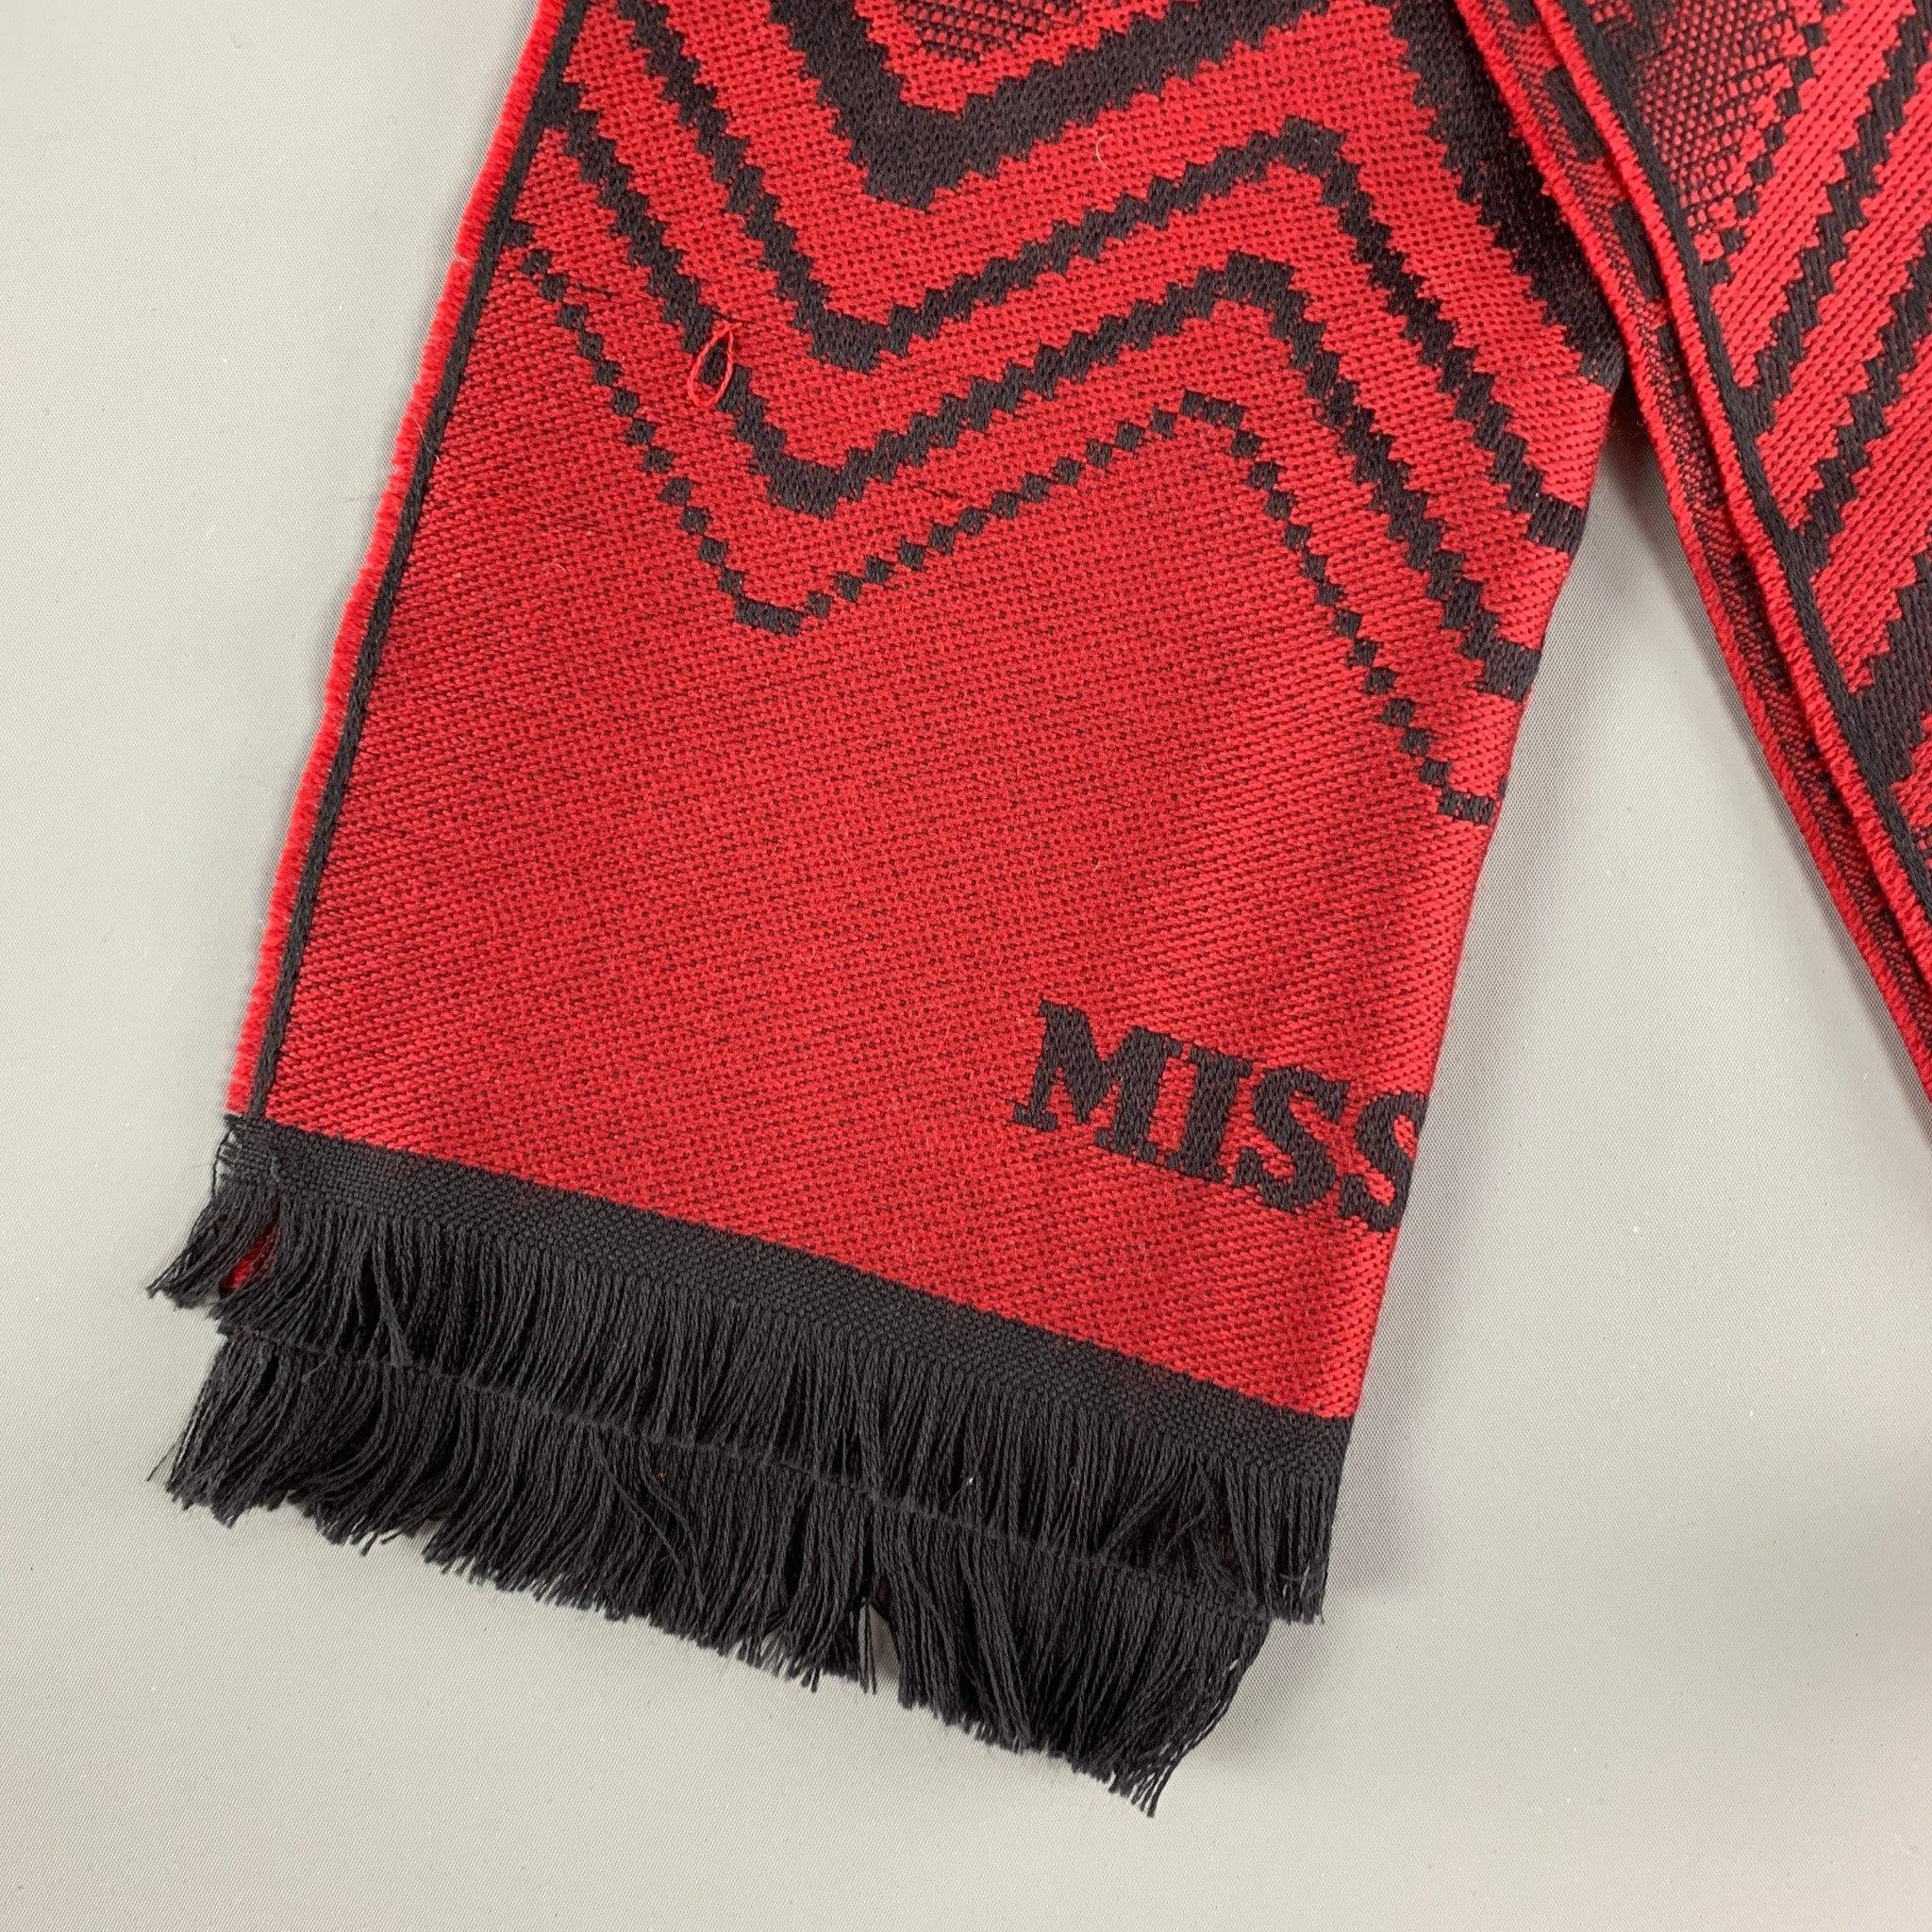 MISSONI scarf comes in a red & black knitted print merino wool with a fringe trim. Made in Italy.
 Excellent
 Pre-Owned Condition. 
 

 Measurements: 
  78 inches x 15 inches 
  
  
  
 Sui Generis Reference: 122648
 Category: Scarves
 More Details
